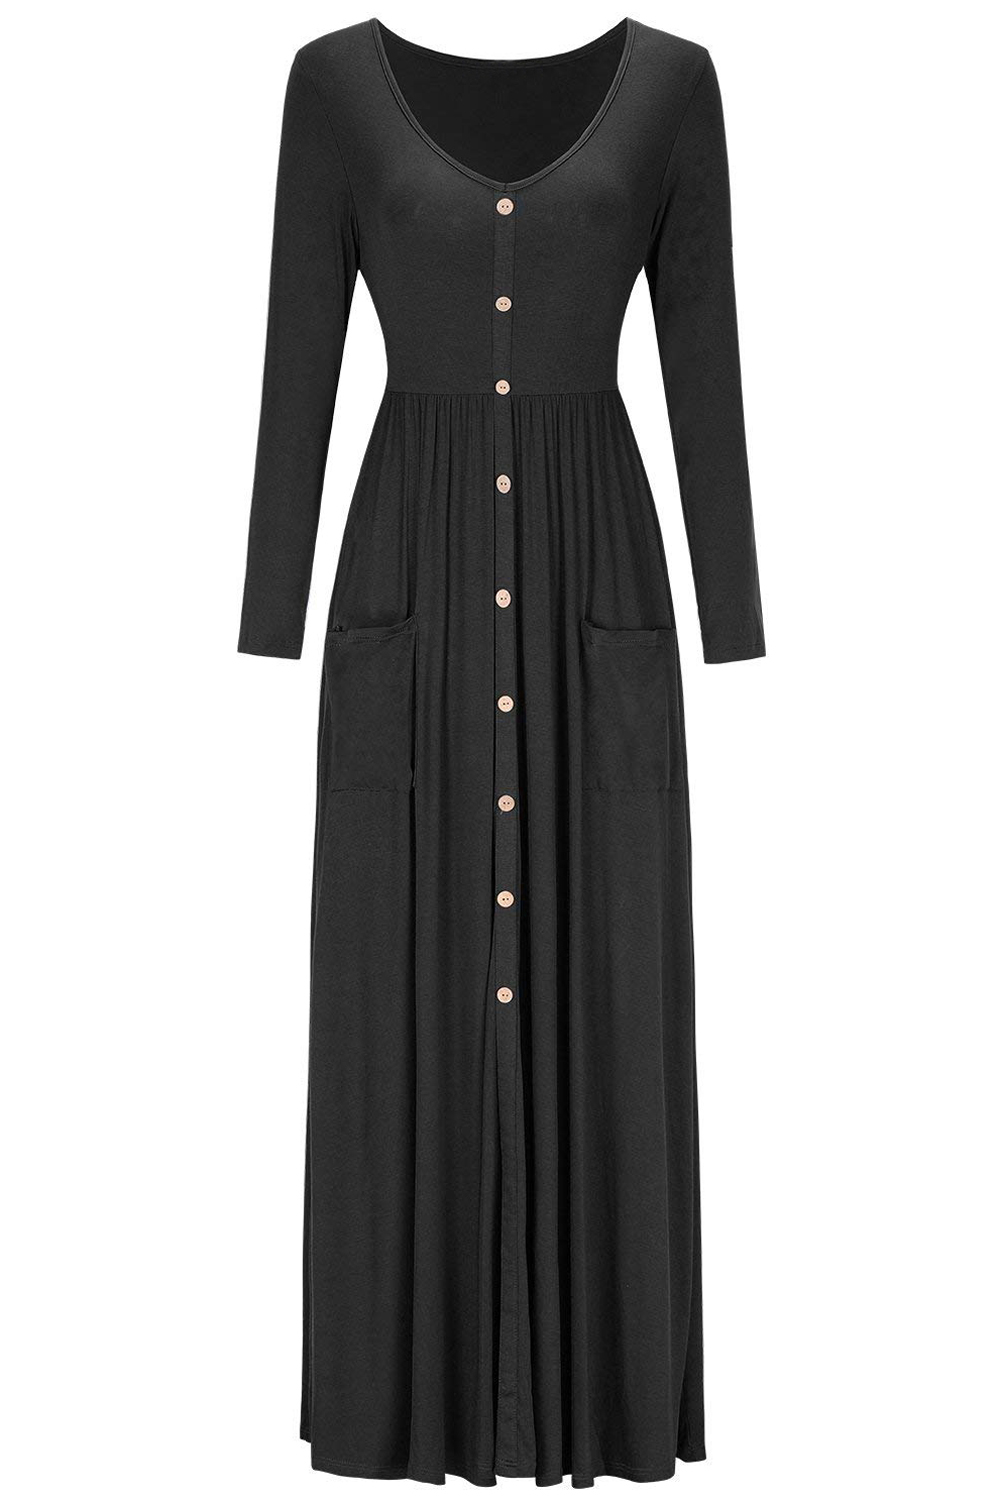 BY610503-2 Hunter  Button Front Pocket Style Casual Long Dress